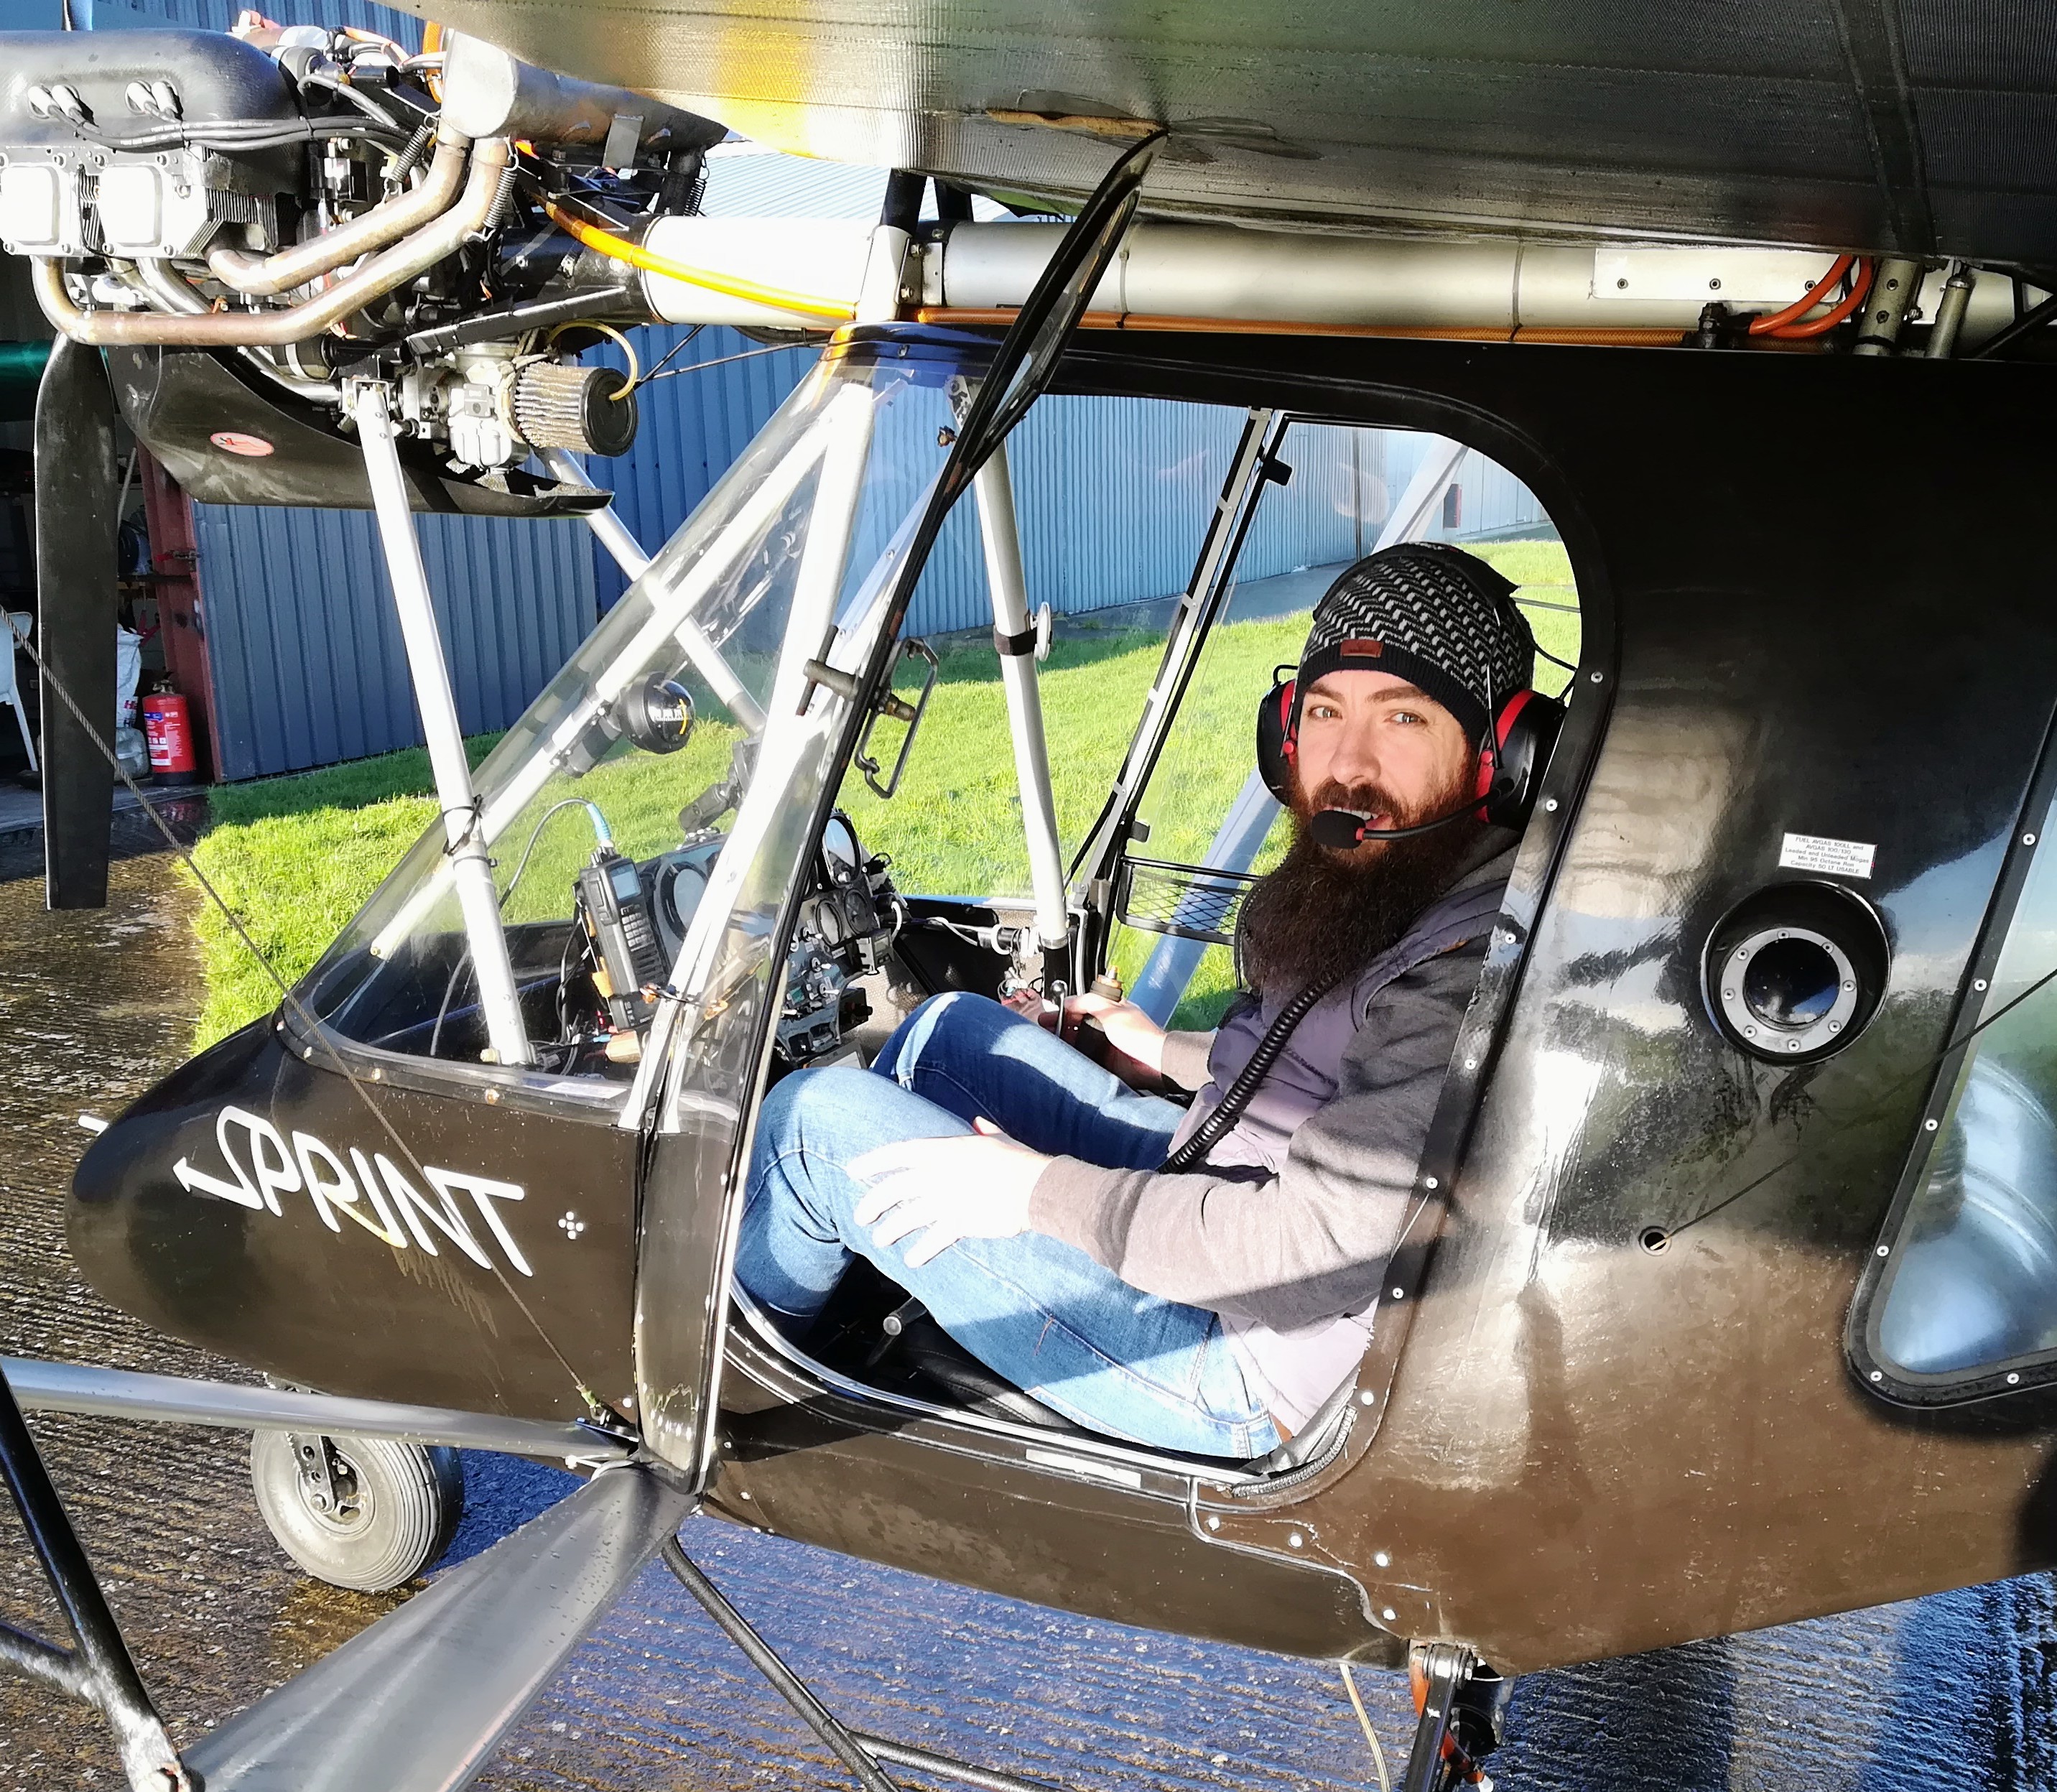 First Solo Flight for Race Engineer Keith Thompson